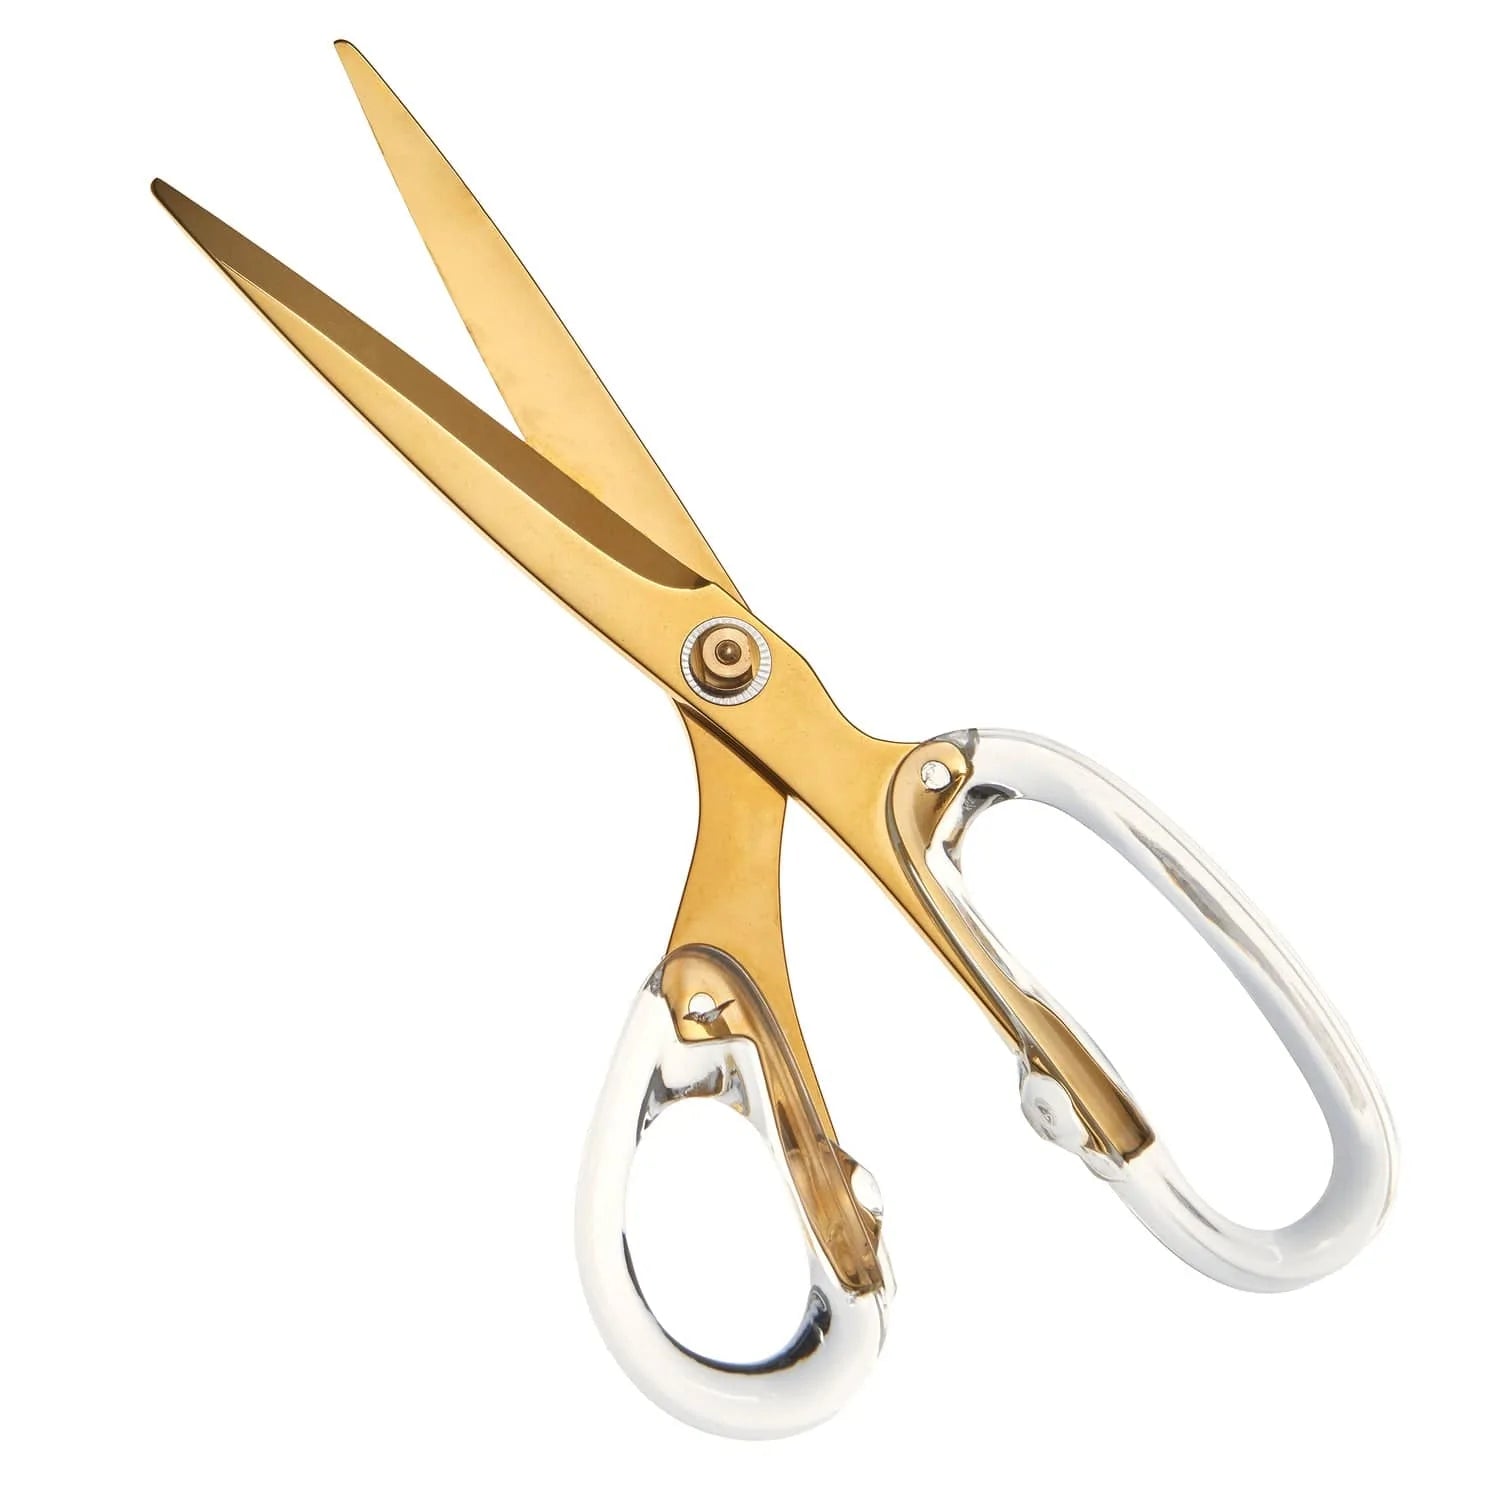 9 Clear Acrylic Scissors, Gold Tone High Quality Sheers, Bent Handle  (26002)